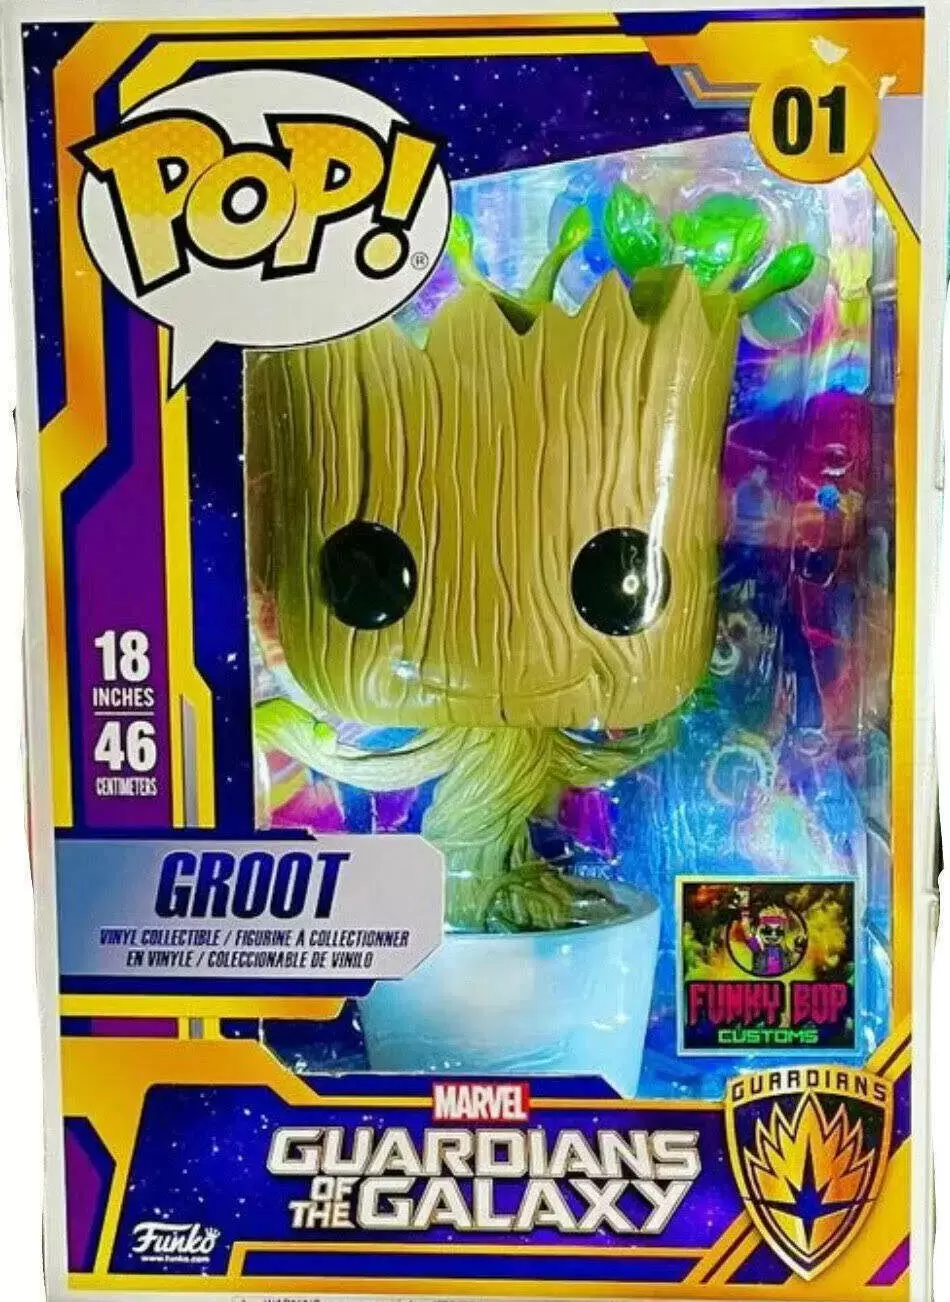 Funko Pop! Guardians of the Galaxy Dancing Groot 18-Inch Super Sized pop #1